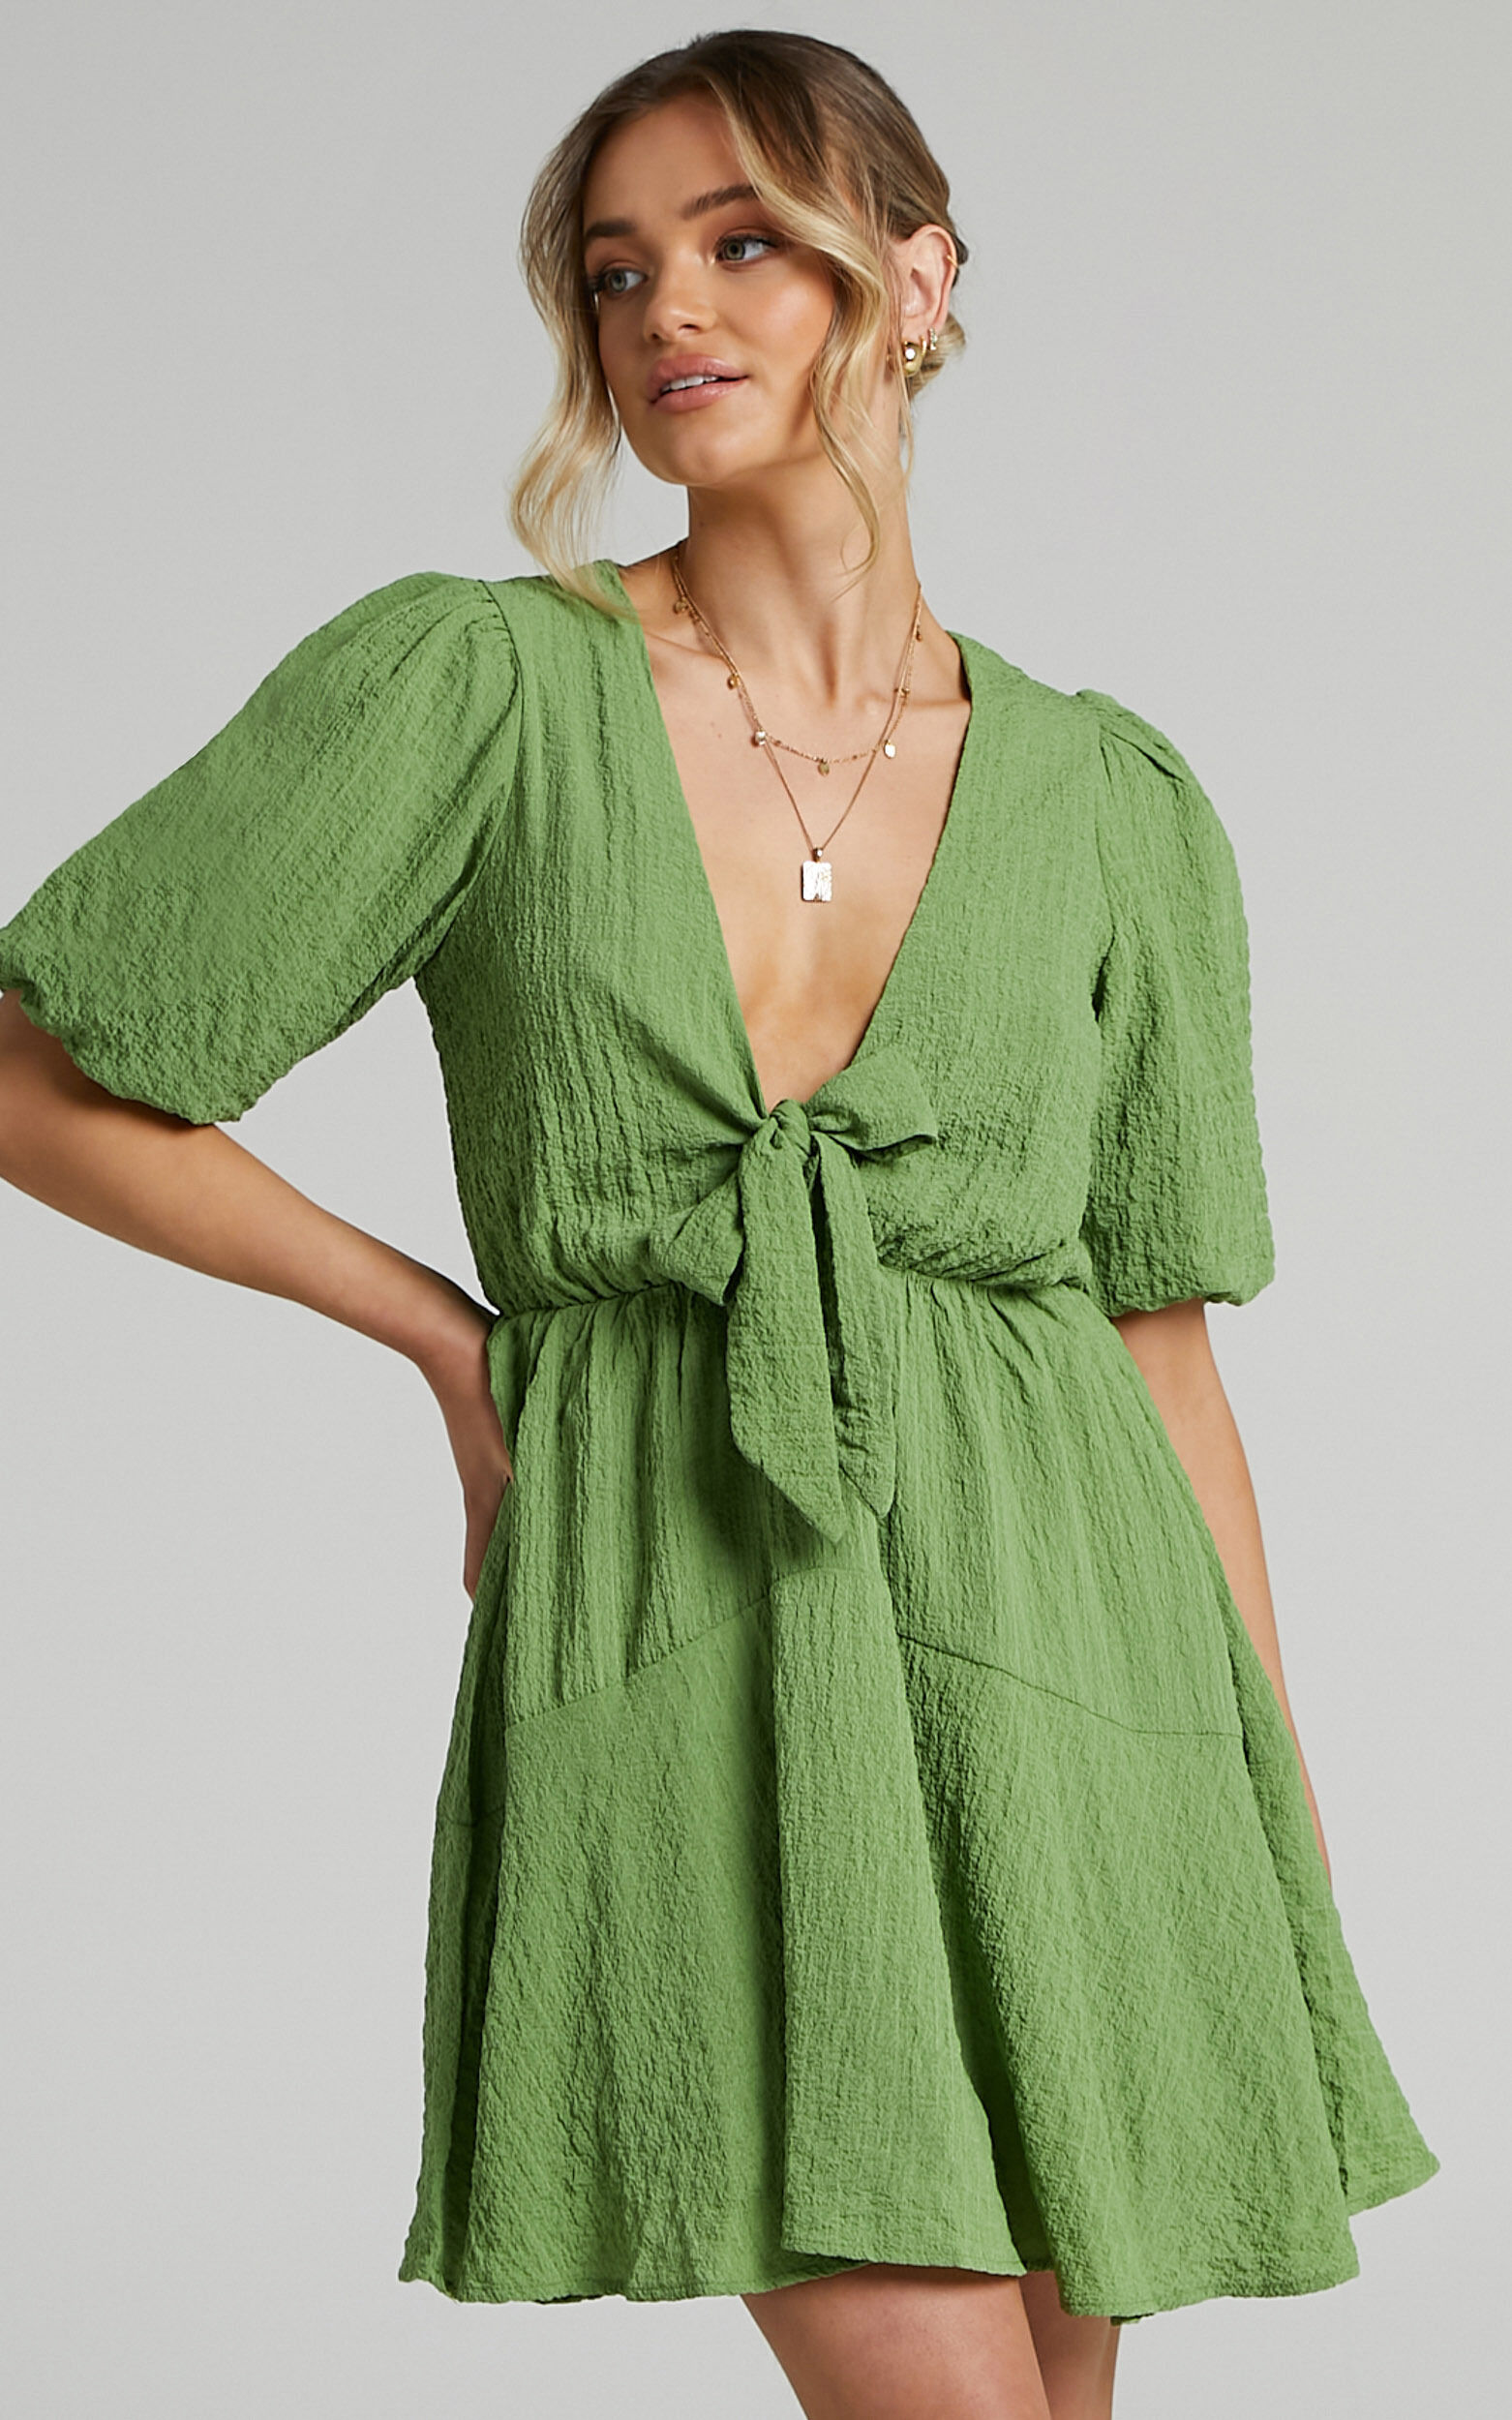 Rosalei Puff Sleeve Tie Front Mini Dress in Green - 04, GRN1, super-hi-res image number null